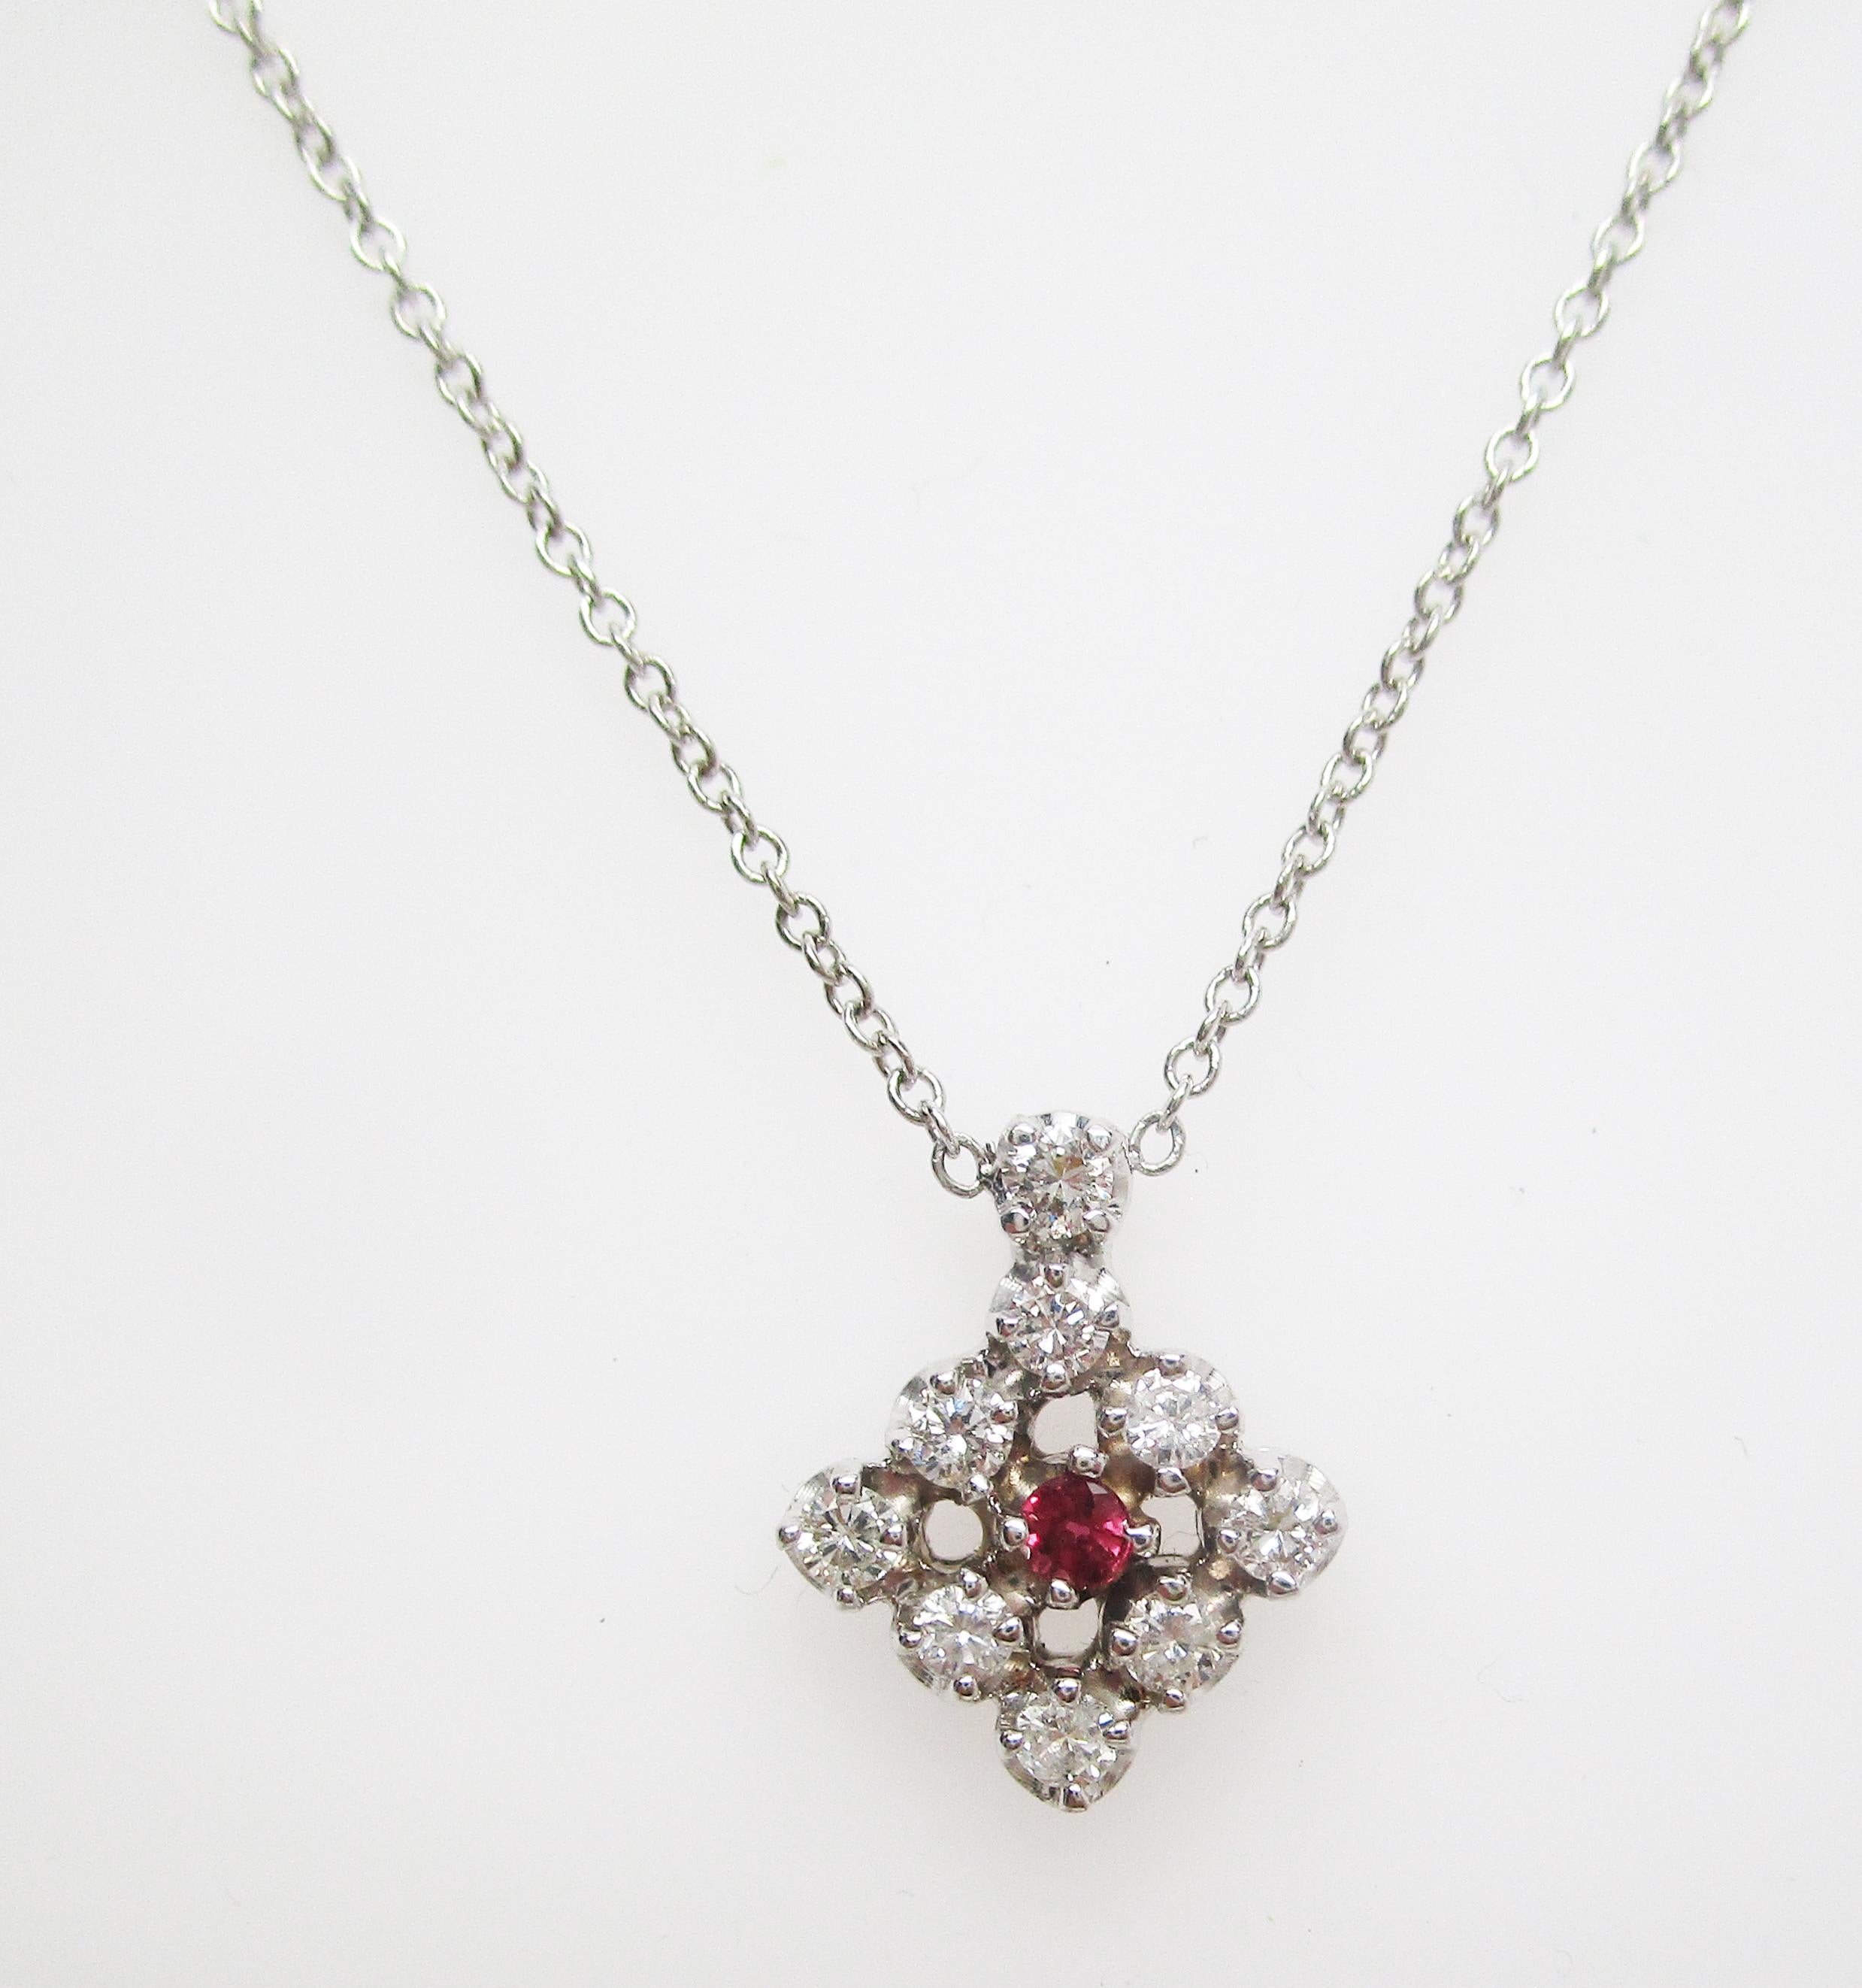 This is a gorgeous 1950s in 14k white gold featuring a stunning ruby center framed by diamonds! The pendant has a lovely geometric design, with a square shape and a diamond top. The contrast between the brilliant white of the diamonds and the